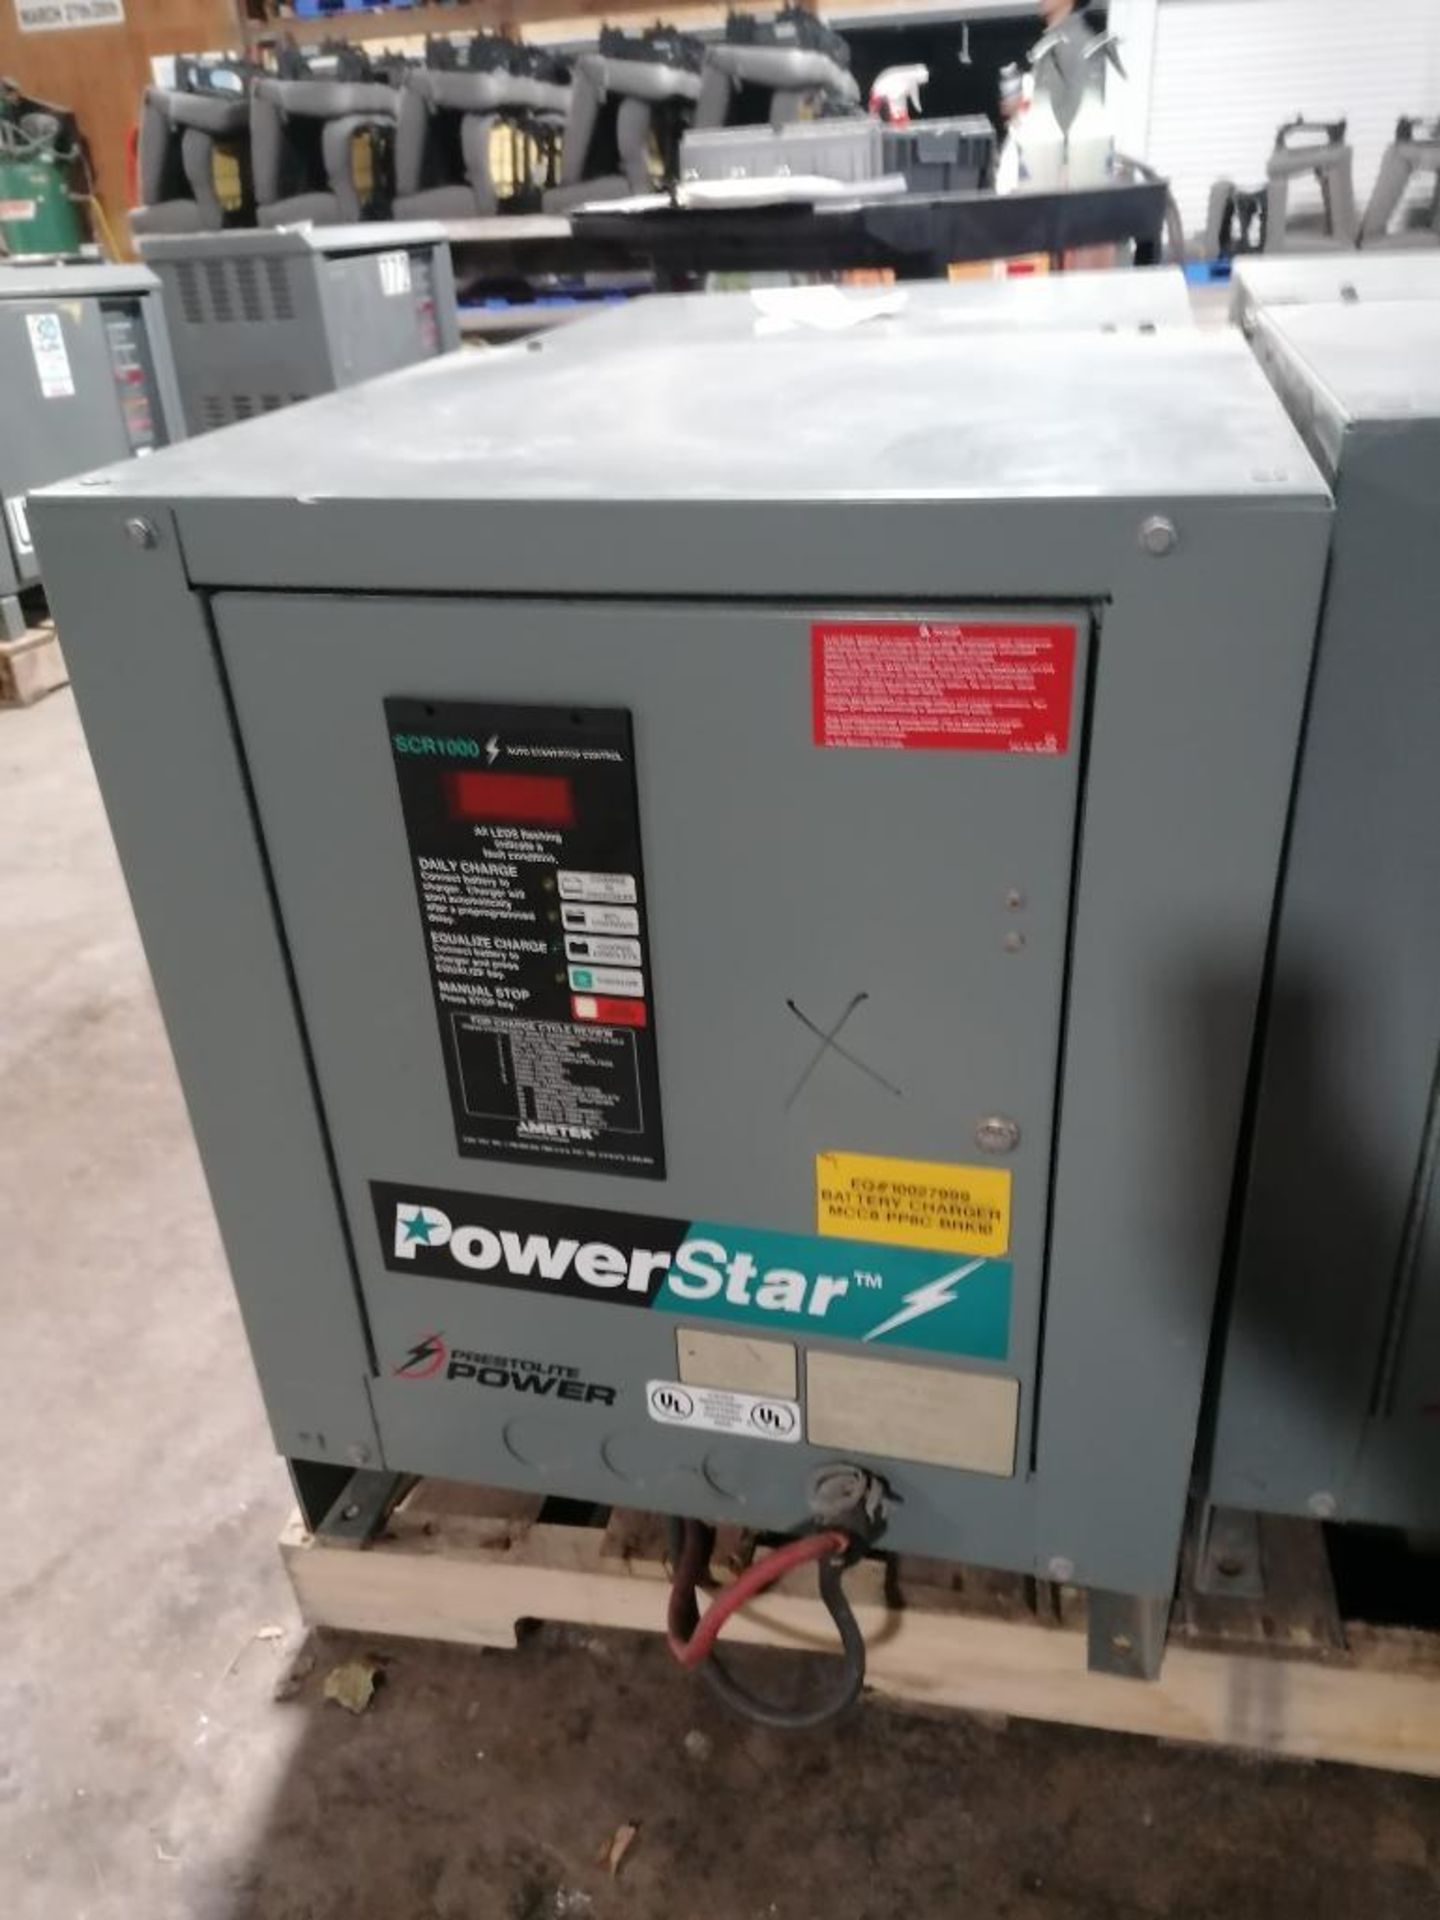 (4) PowerStar SCR1000 Industrial Forklift Battery Charger, Model 98Y3-12, Serial #404CS21472, Serial - Image 11 of 19